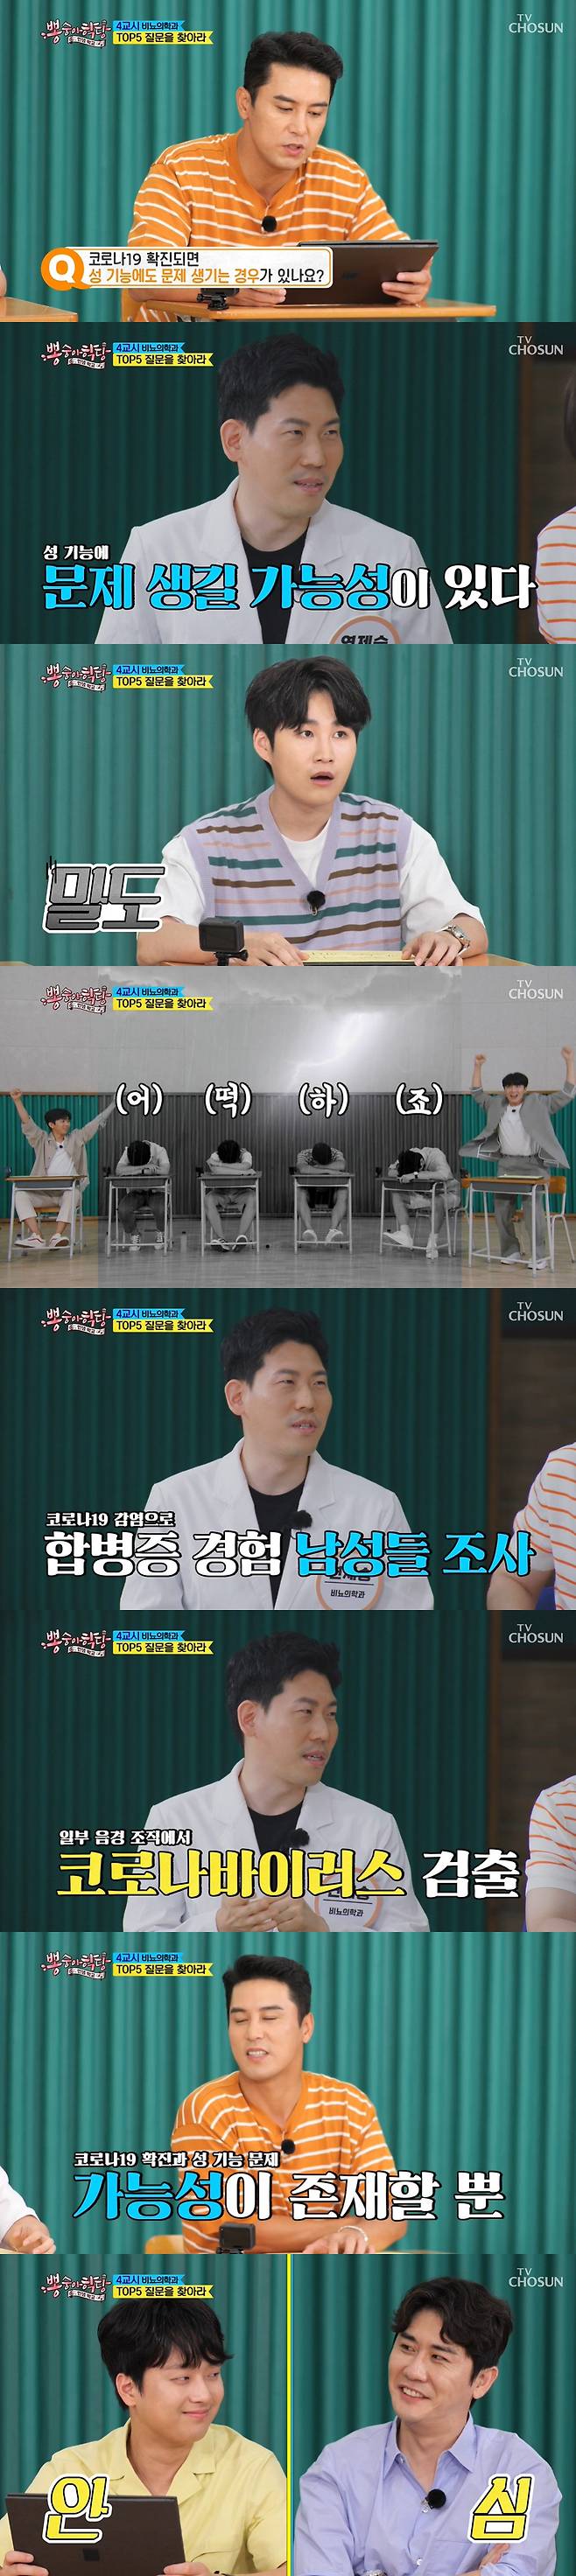 Jang Min-Ho, Young Tak, Kim Hie-jae, and Lee Chan-won bowed to the words, If COVID-19 tested positive, sexual function can also be problematic.In the TV CHOSUN Mulberry monkey school: Life school broadcast on the 18th, Pong 6 met with experts from various fields and solved various rumors and questions related to health.Boom said, It is important to increase immunity to the Corona city. Todays class is a wise immune life.So, Pong 6 asked the urology department Neurology about what I was curious about.Neurology said, If your thighs are thick, you can see it as right.If you work hard and your thighs get thicker and your muscle mass increases, you will naturally rise if your blood flow increases, he said.Then Lim Young-woong suddenly gave a laugh by exercising his thighs.Young Tak questioned life habits that degrade energyBasically, drinking, smoking, overwork and stress are not good, Neurology said. Good things have satisfactory sex.Jang Min-Ho asked, Is there a problem with sexual function when COVID-19 tested positive? Neurology replied, Possible.Jang Min-Ho, Young Tak, Lee Chan Won and Kim Hie-jae, who were tested on COVID-19, bowed their heads, and Lim Young-woong and Lim Yoon Sung laughed with their arms.Neurology said, There is only possibility. COVID-19 is still under study because of the latest disease, Yi GiOne of the studies has been tested by some of the people who have complications from corona infections and found corona virus in the penile tissue, he said. It was only suggested that there could be a negative effect in many processes related to erection.The members looked relieved.Lim Young-woong asked, Whats in good food for the prostate? and Neurology said, Theres tomatoes, broccoli - the best week for the week.Then Jang Min-Ho said, I can eat tomatoes and broccoli with a drink snack. The boom said, I have to eat one field.Boom also asked, Can you be a foot Donation transfer if you use a mask? Neurology said, In the normal sense, you can say no, and Pong 6 applauded.But Neurology said: Its not completely impossible.If there is a disruption in oxygen supply through the mask, foot Donation can come, he said. Usually people without respiratory disease have no impact.Kim Hie-jae asked if the eel tail has a steministr enhancement effect, and Neurology explained that the eel can turn around and turn around because of the high protein Yi Gi, which can be effective in steministration, but there is not particularly much more nutrients in the tail.